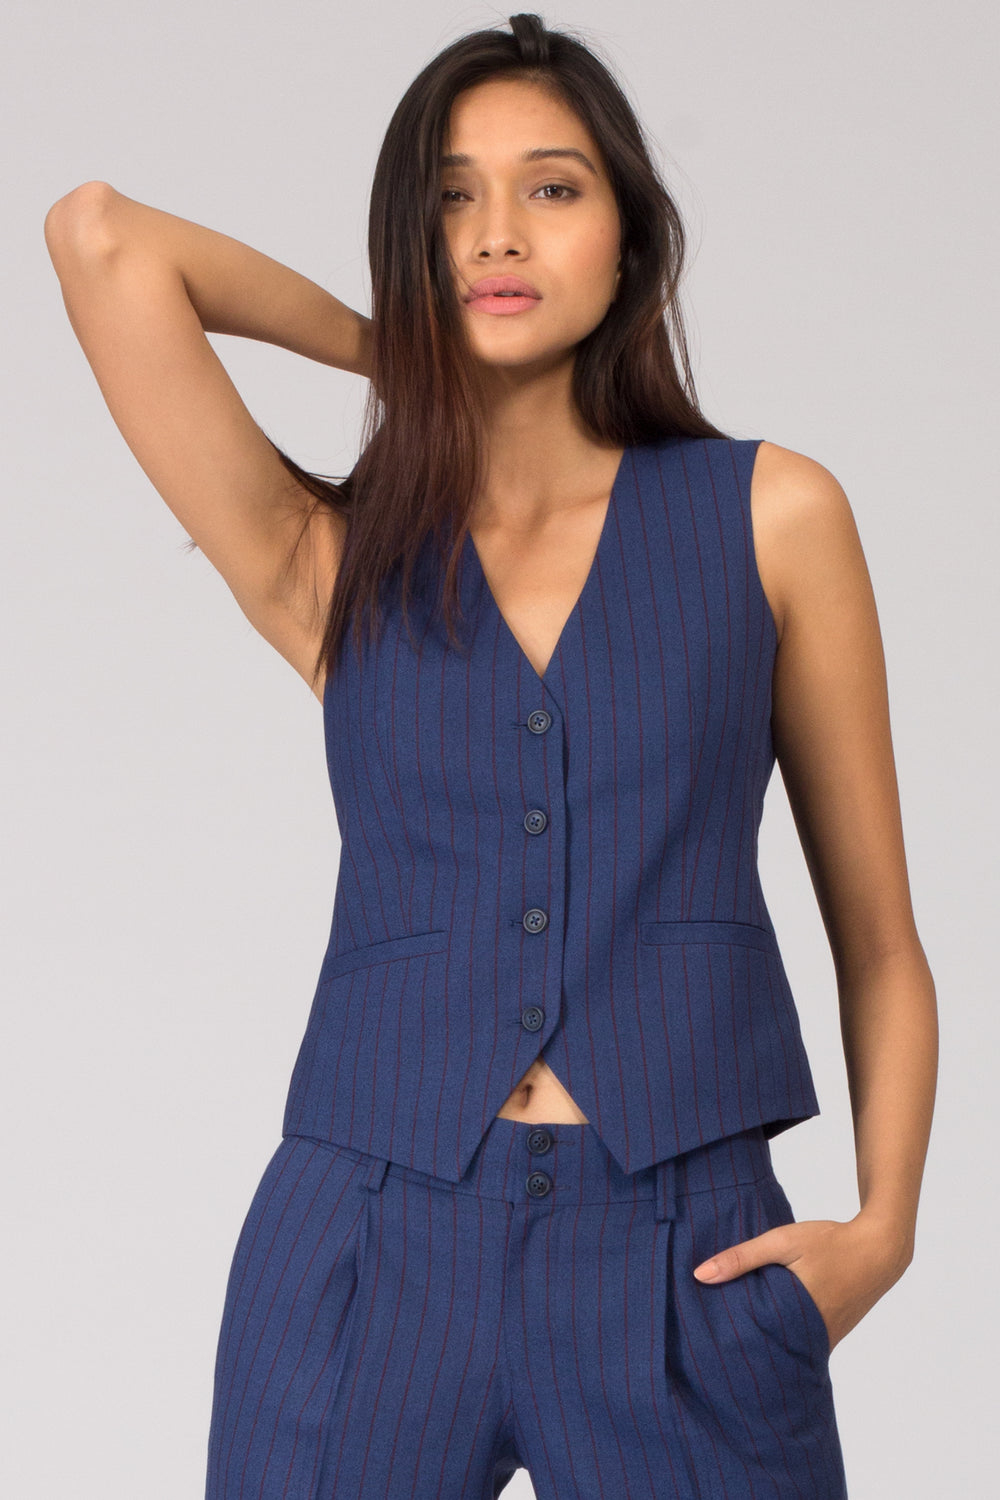 Blue Pinstripe Formal Blazer Suits for Working Women. Shop for formal trousers, suits and workwear dresses at www.intermod.in